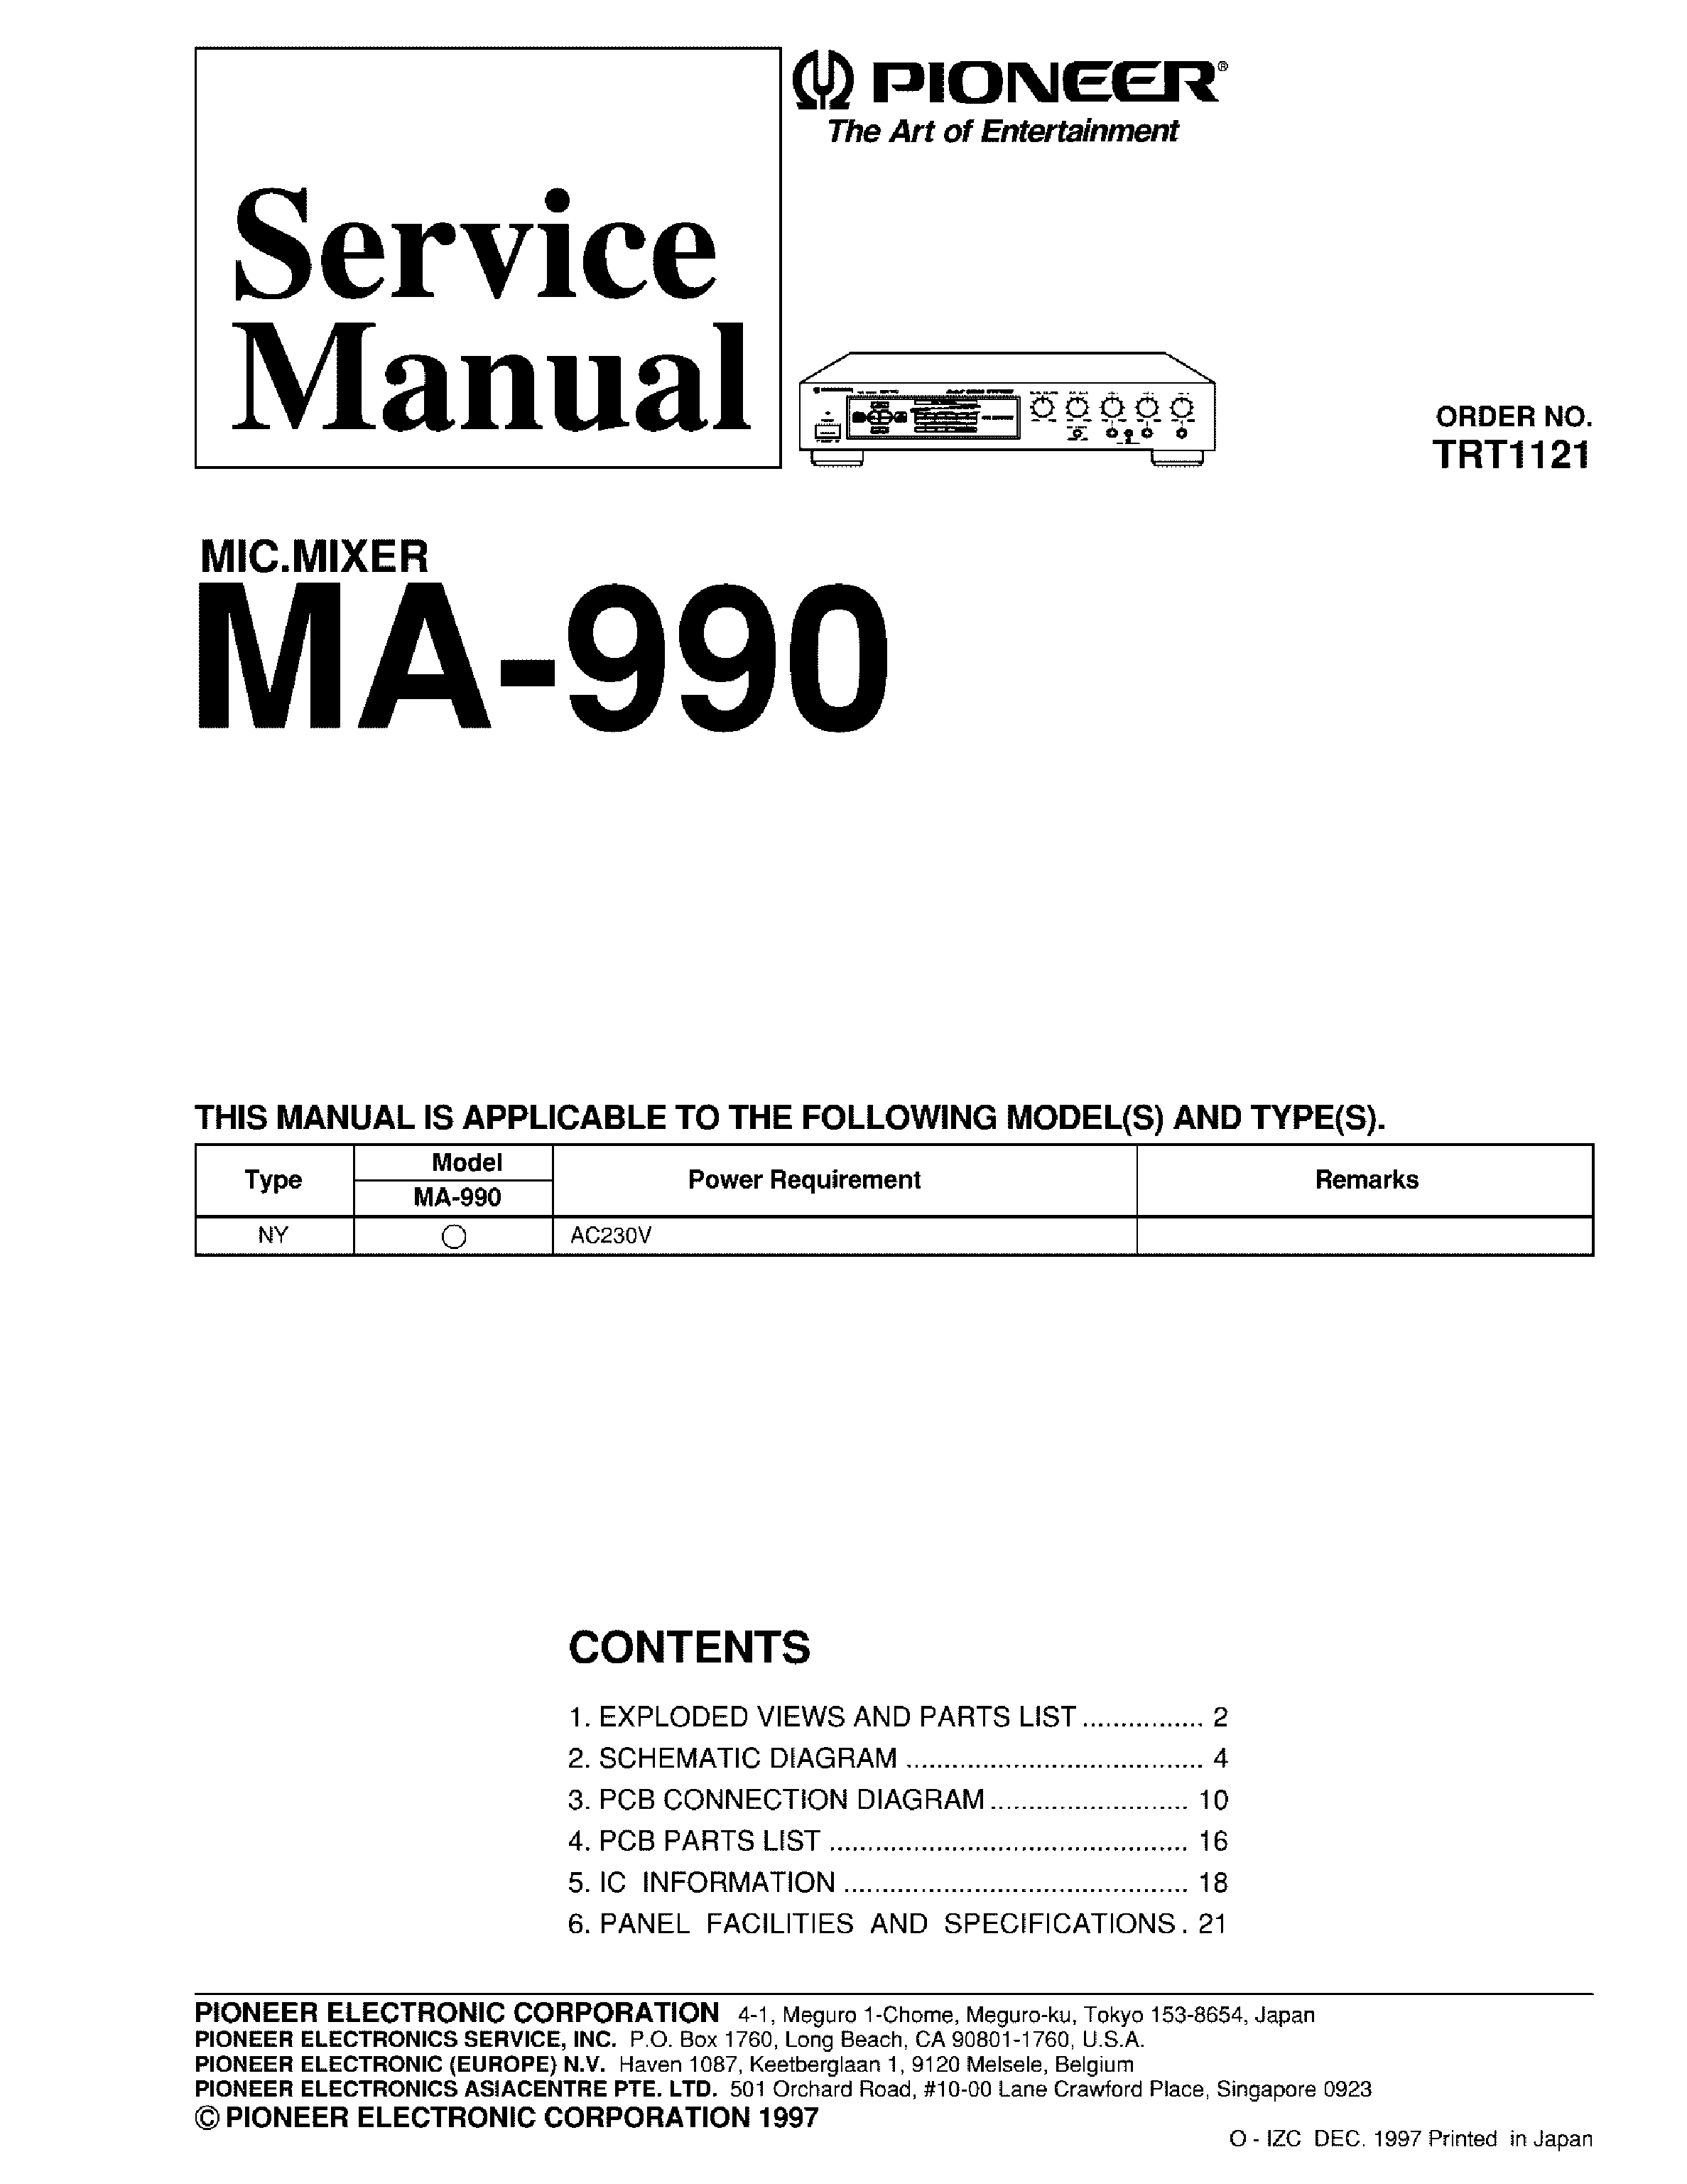 PIONEER MA990 service manual (1st page)